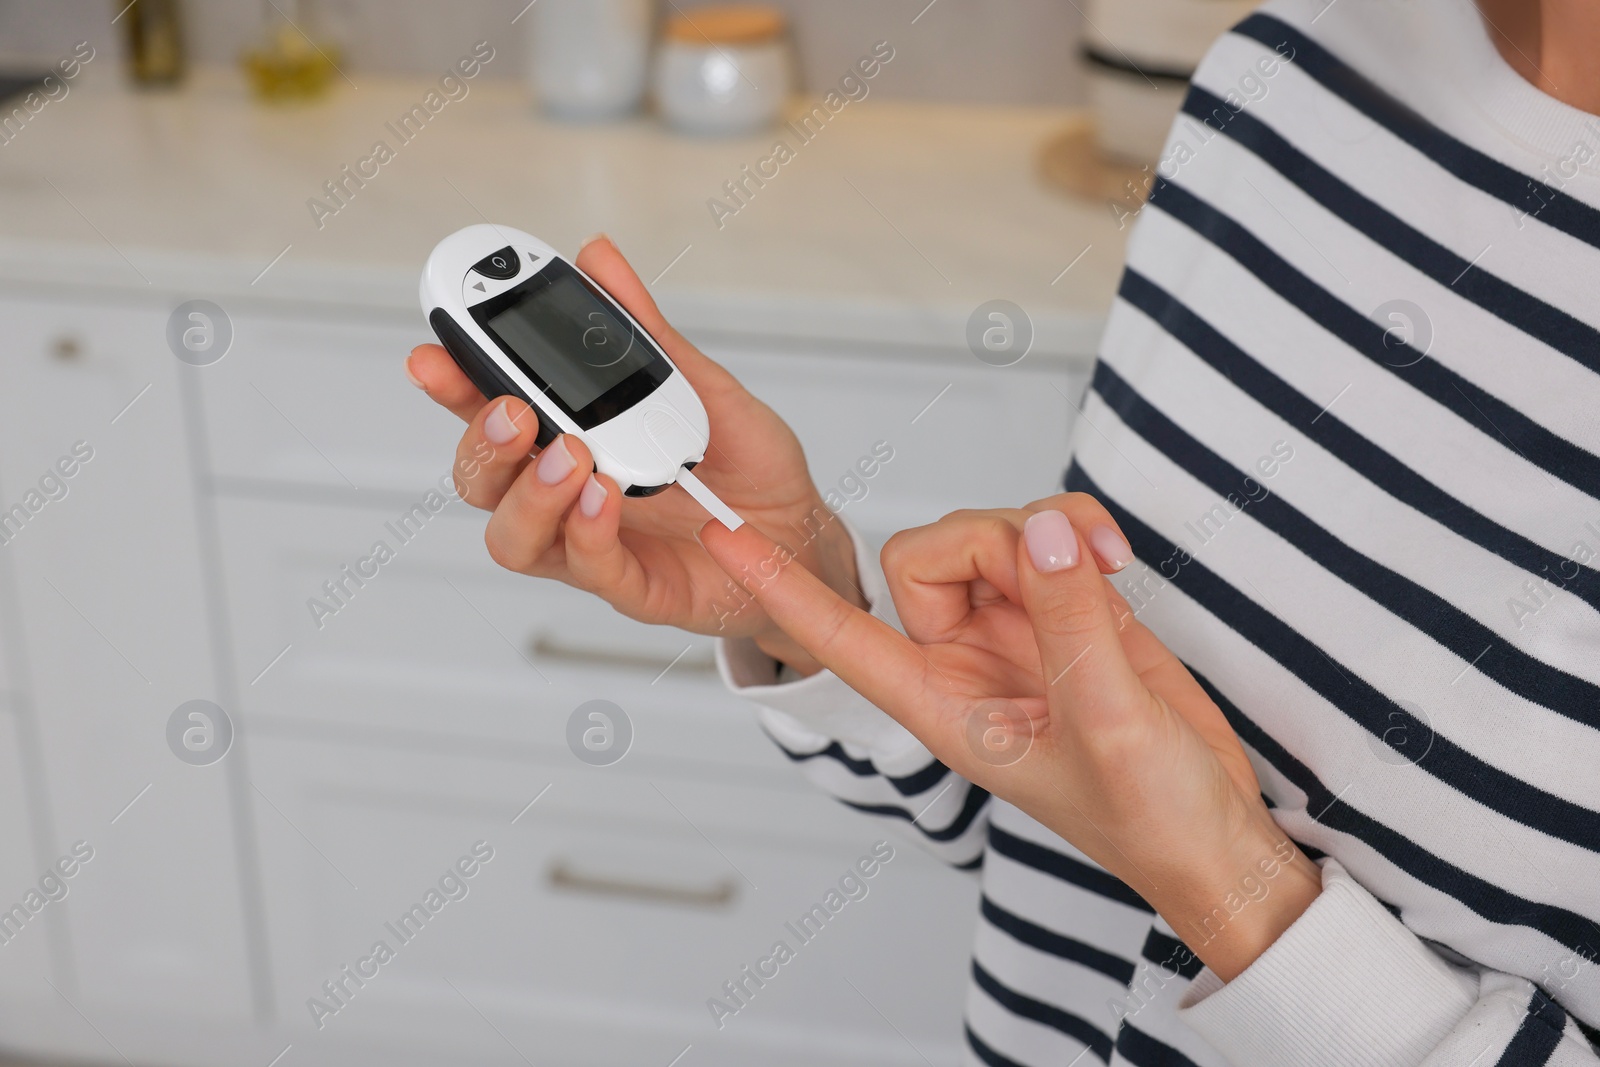 Photo of Diabetes. Woman checking blood sugar level with glucometer in kitchen, closeup